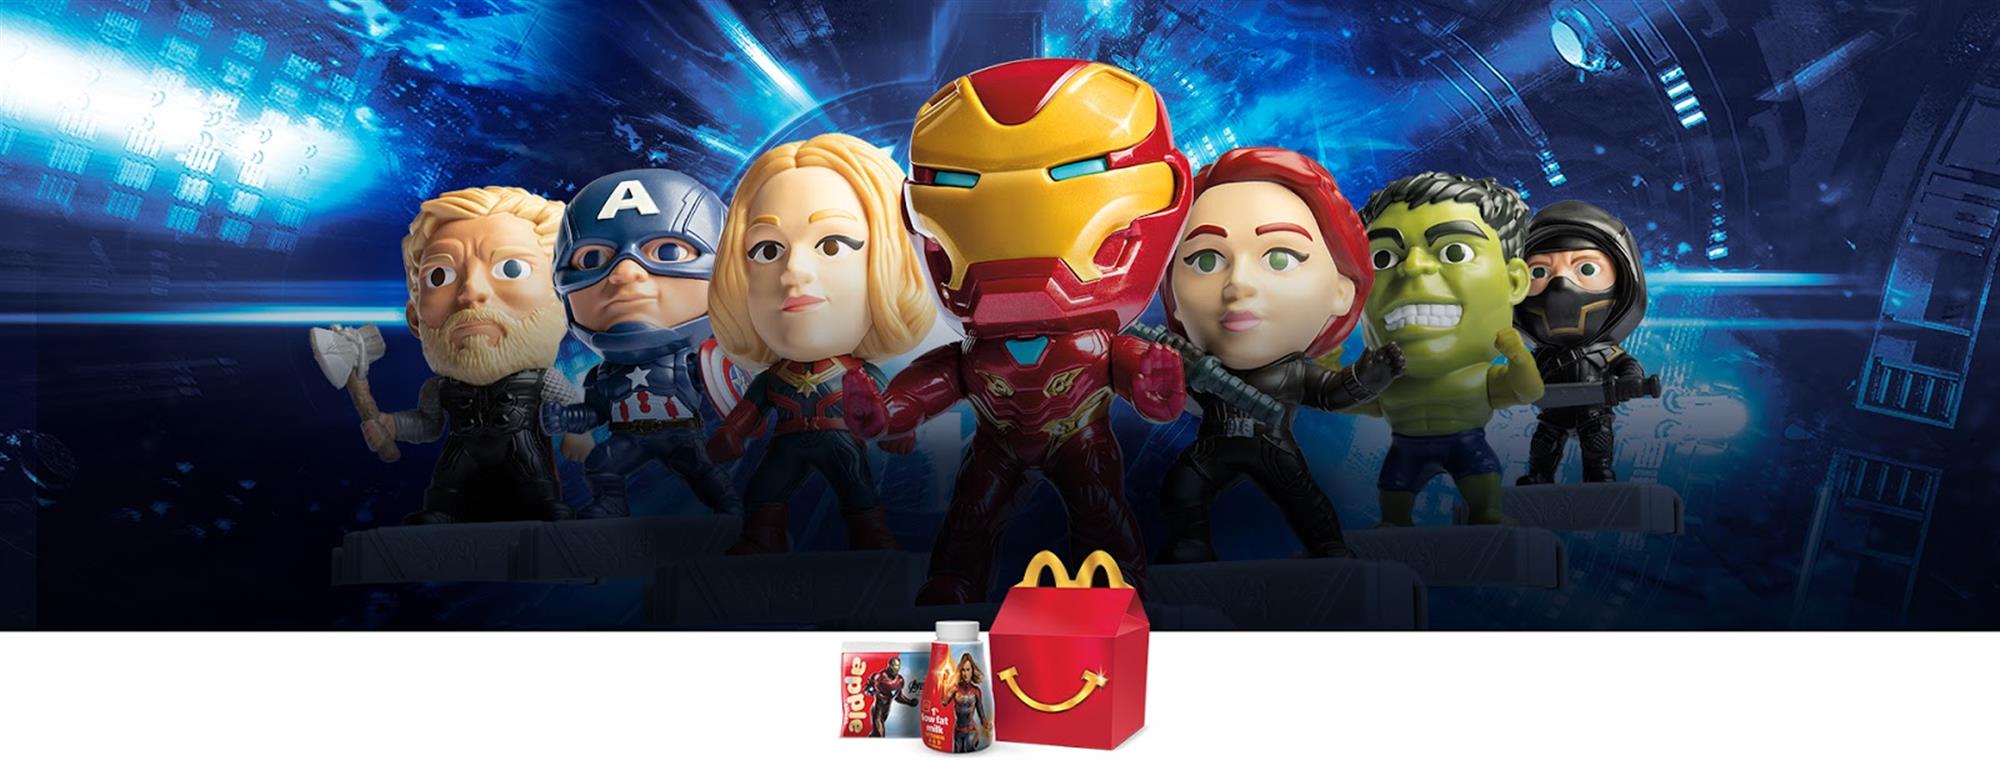 2019 McDonald’s Avengers Marvel Happy Meal Toy #22 Thor 